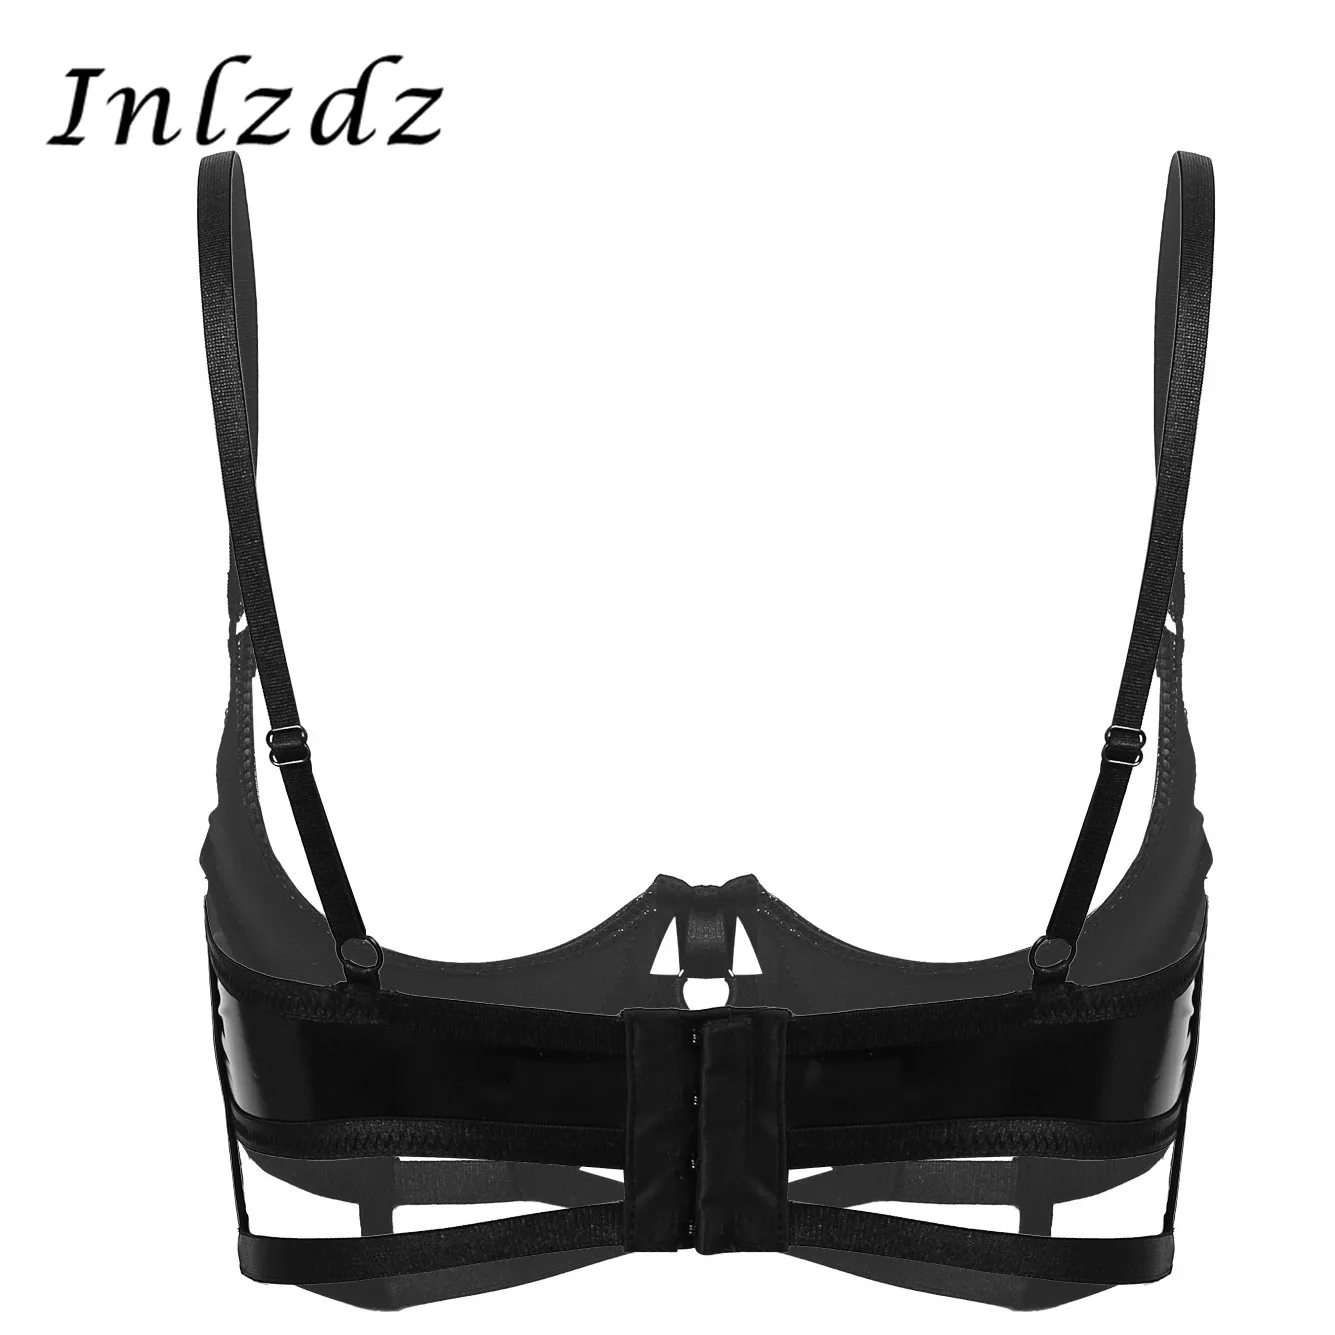 

Womens Lingerie Sex Bra Wet Look Patent Leather Adjustable Spaghetti Shoulder Straps Quarter Cup Strappy Underwired Hot Bra Tops